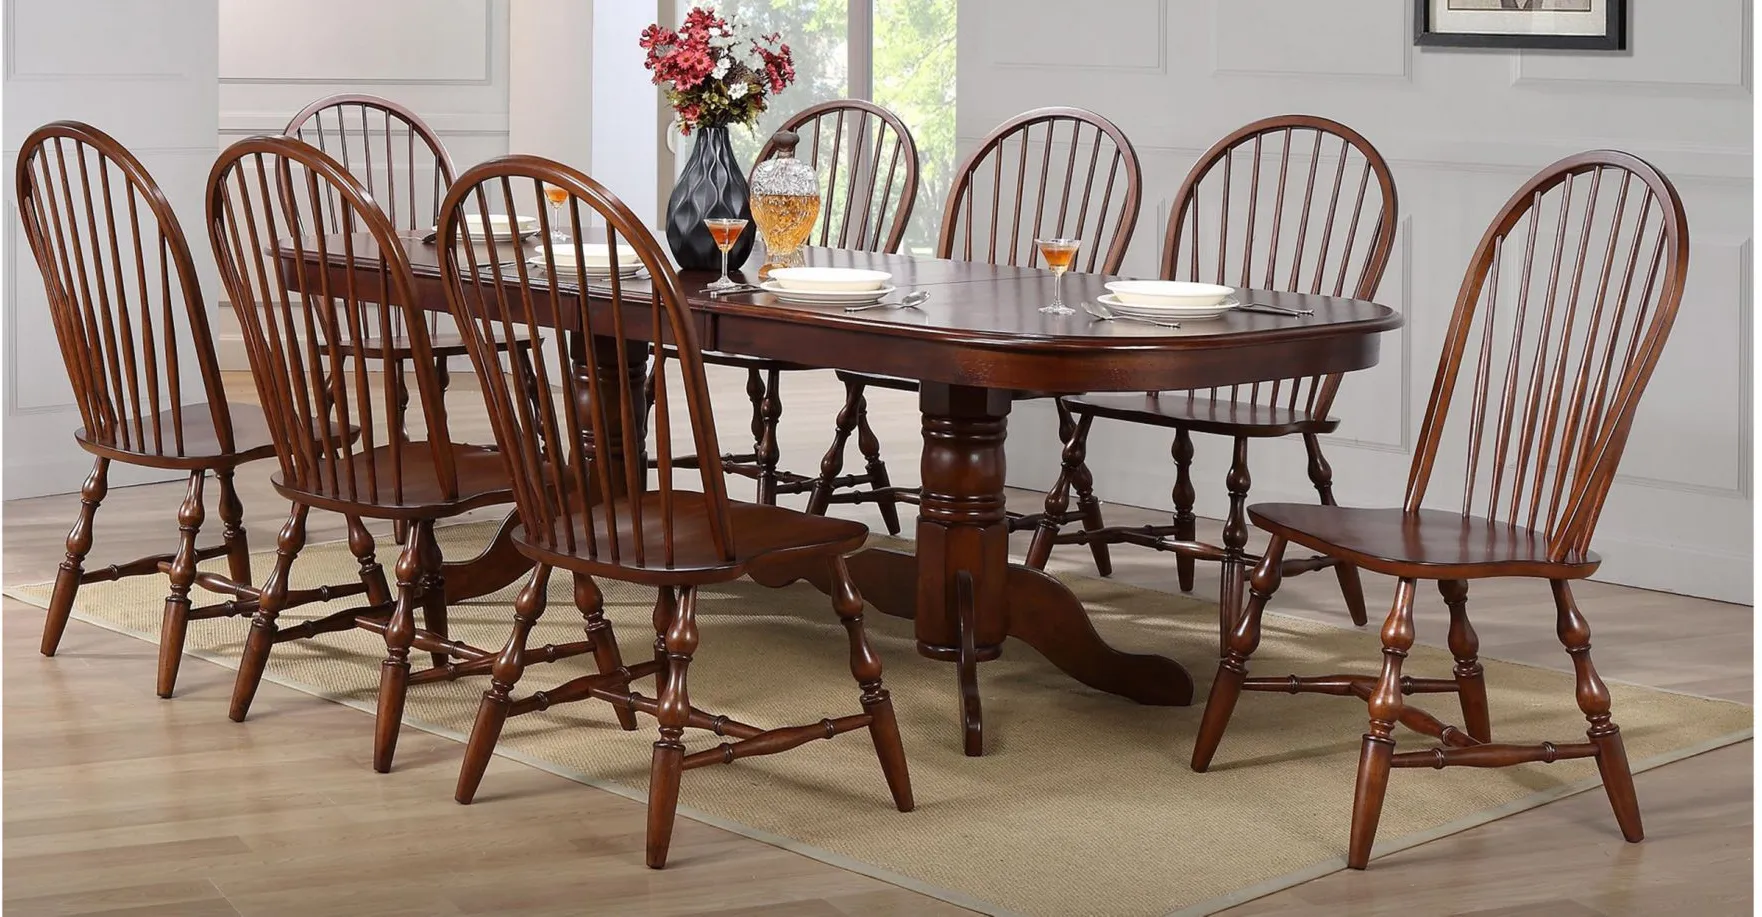 Fenway 9-pc. Dining Set w/ Pedestal Table in Chestnut by Sunset Trading